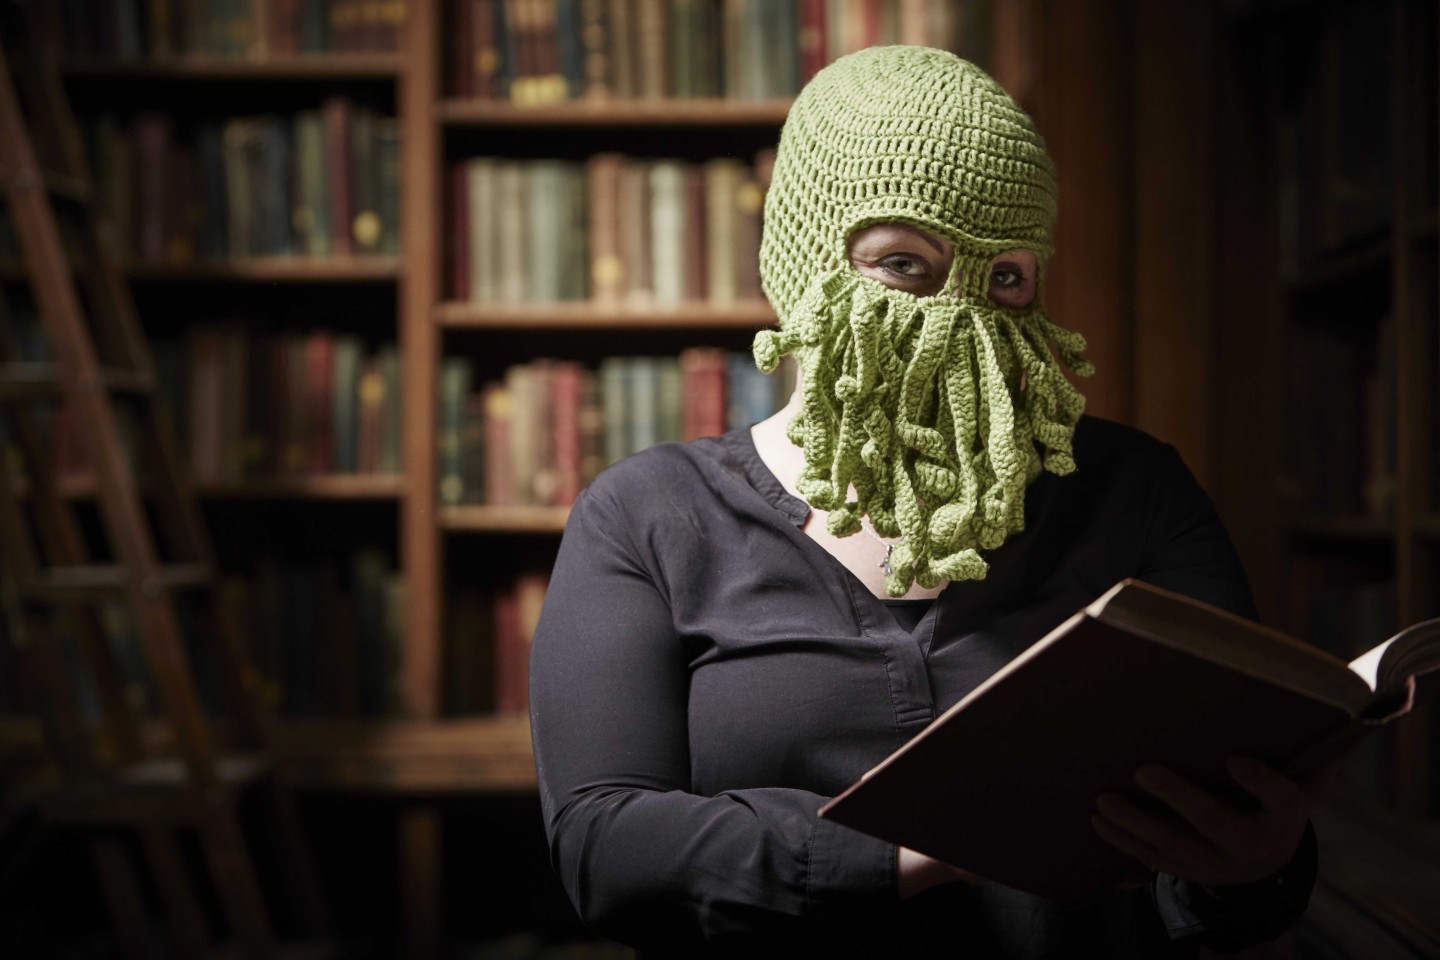 A woman reading in a library wearing a balaclava with tentacles across her mouth